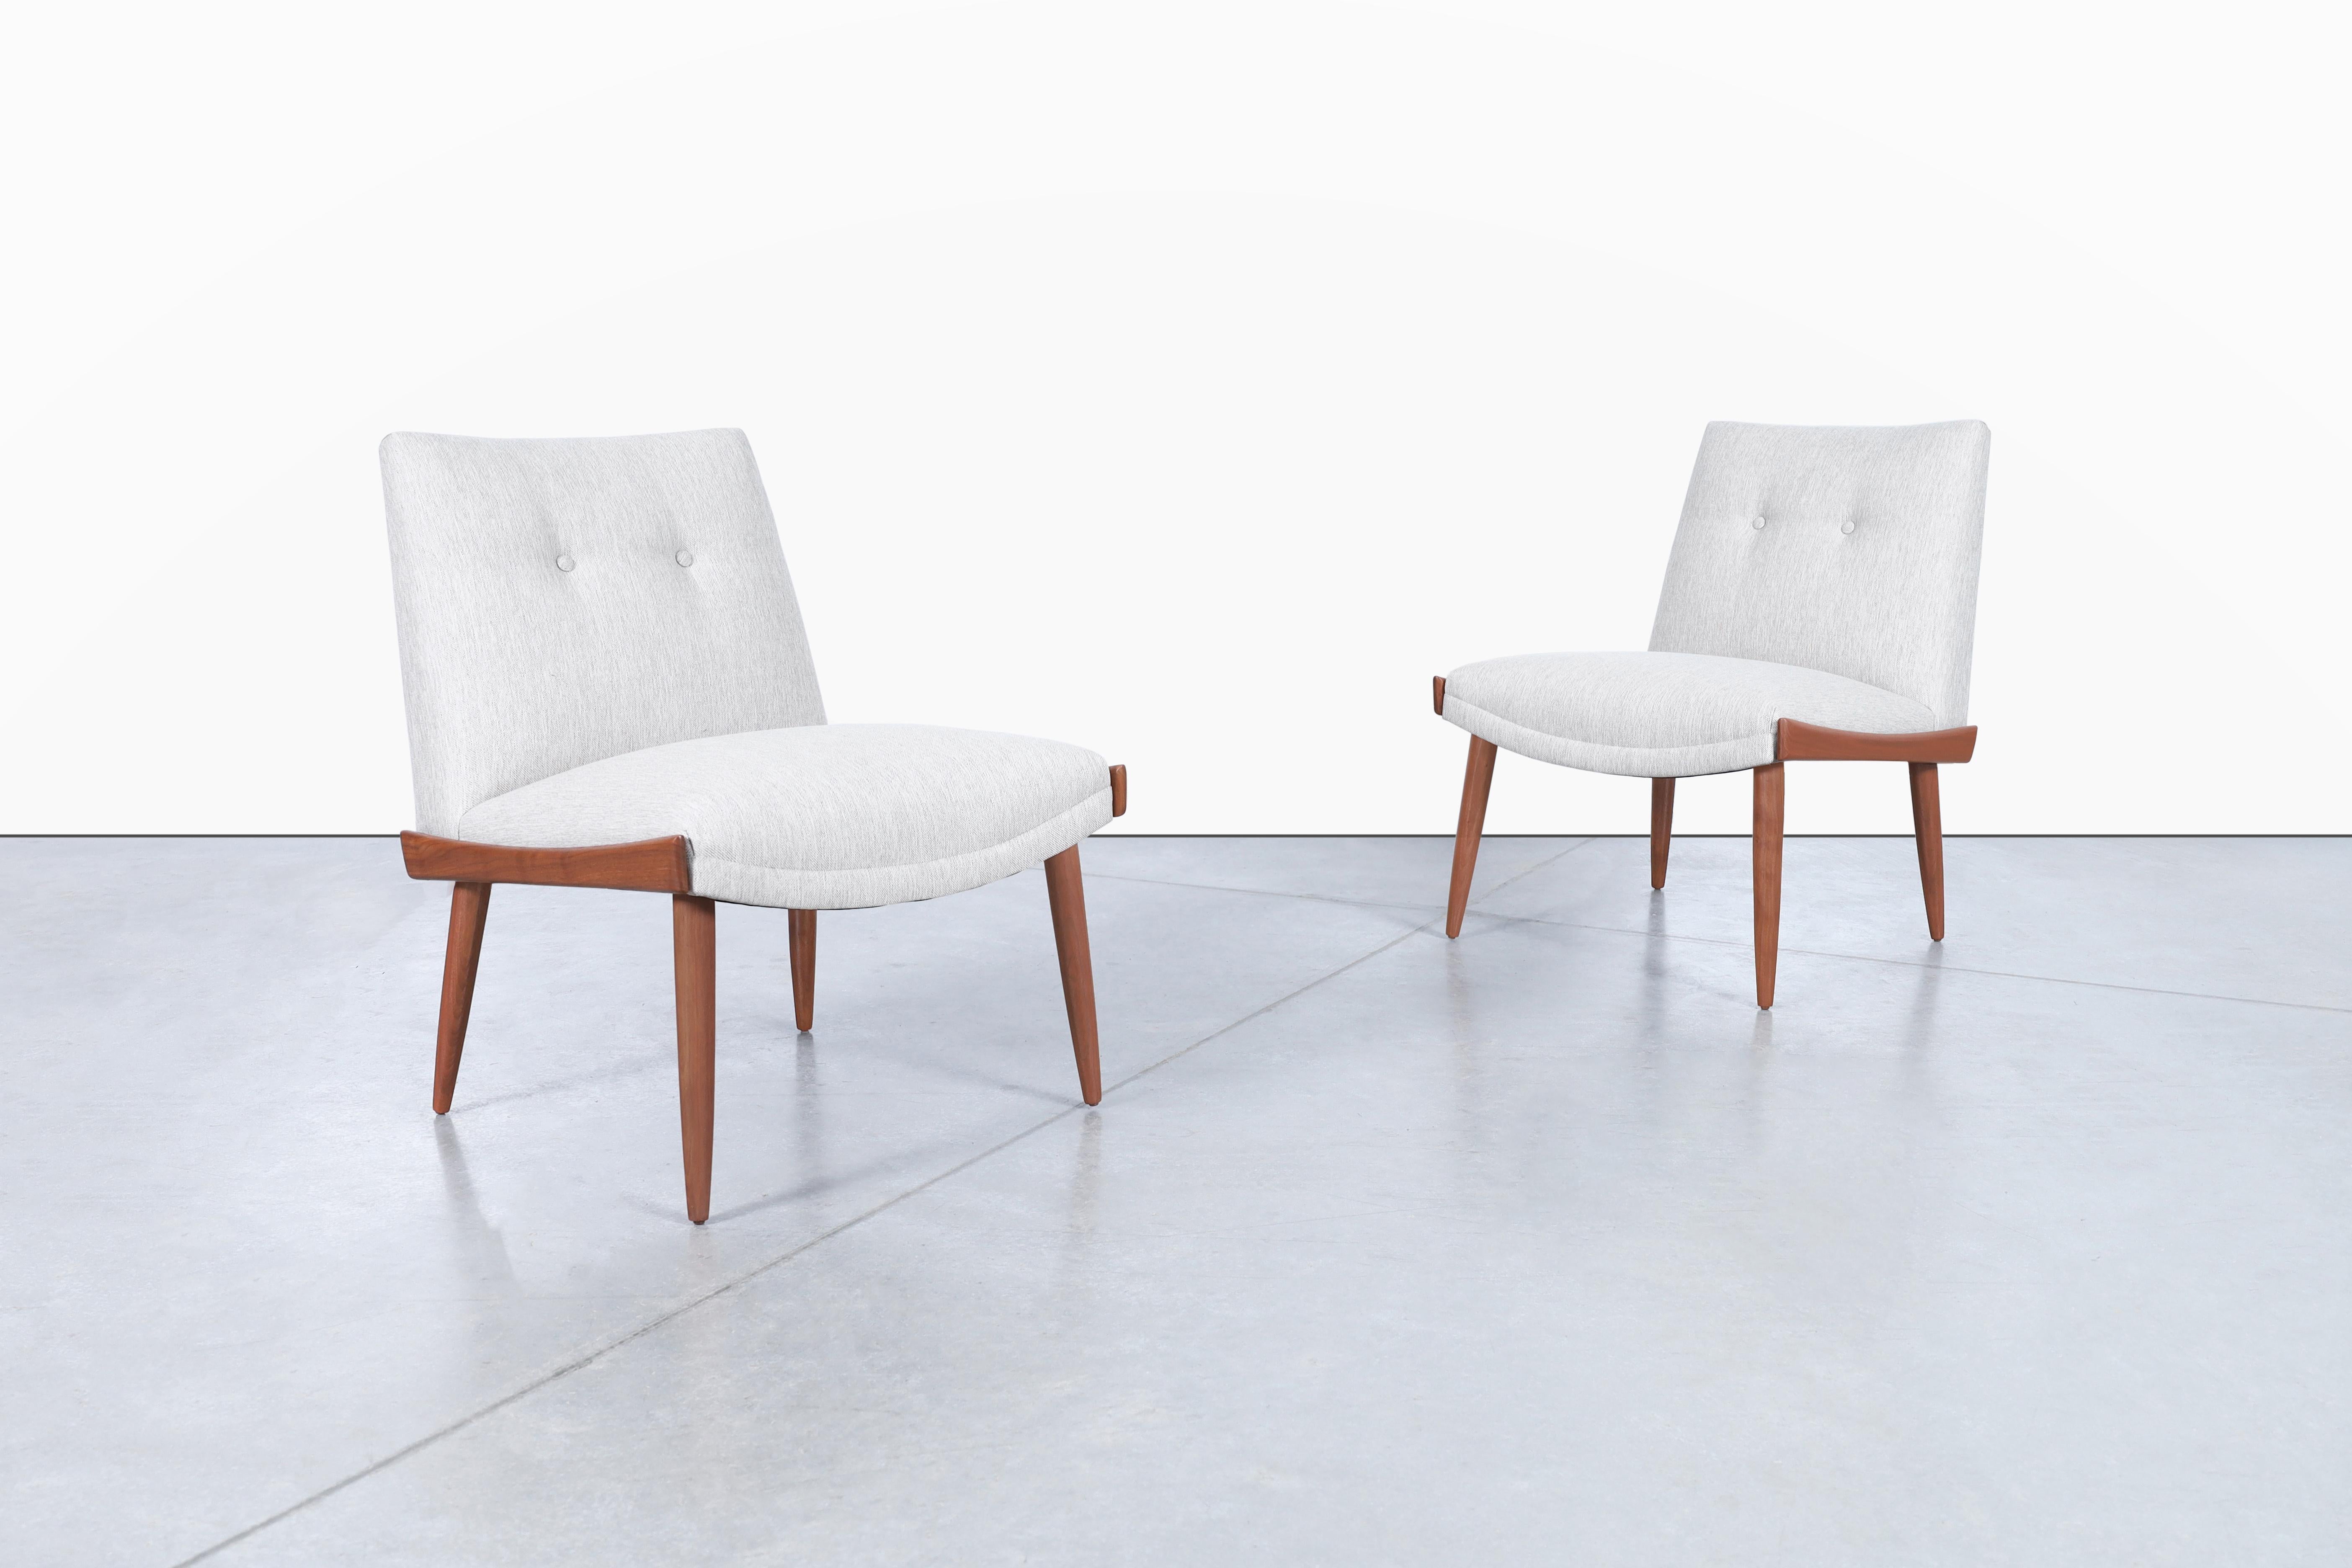 Mid-century modern walnut slipper chairs designed by Kroehler in the United States, circa 1960s. These chairs are not just a pair of chairs, but a statement piece that exudes elegance and charm. The sculptural walnut sides and tapered solid walnut